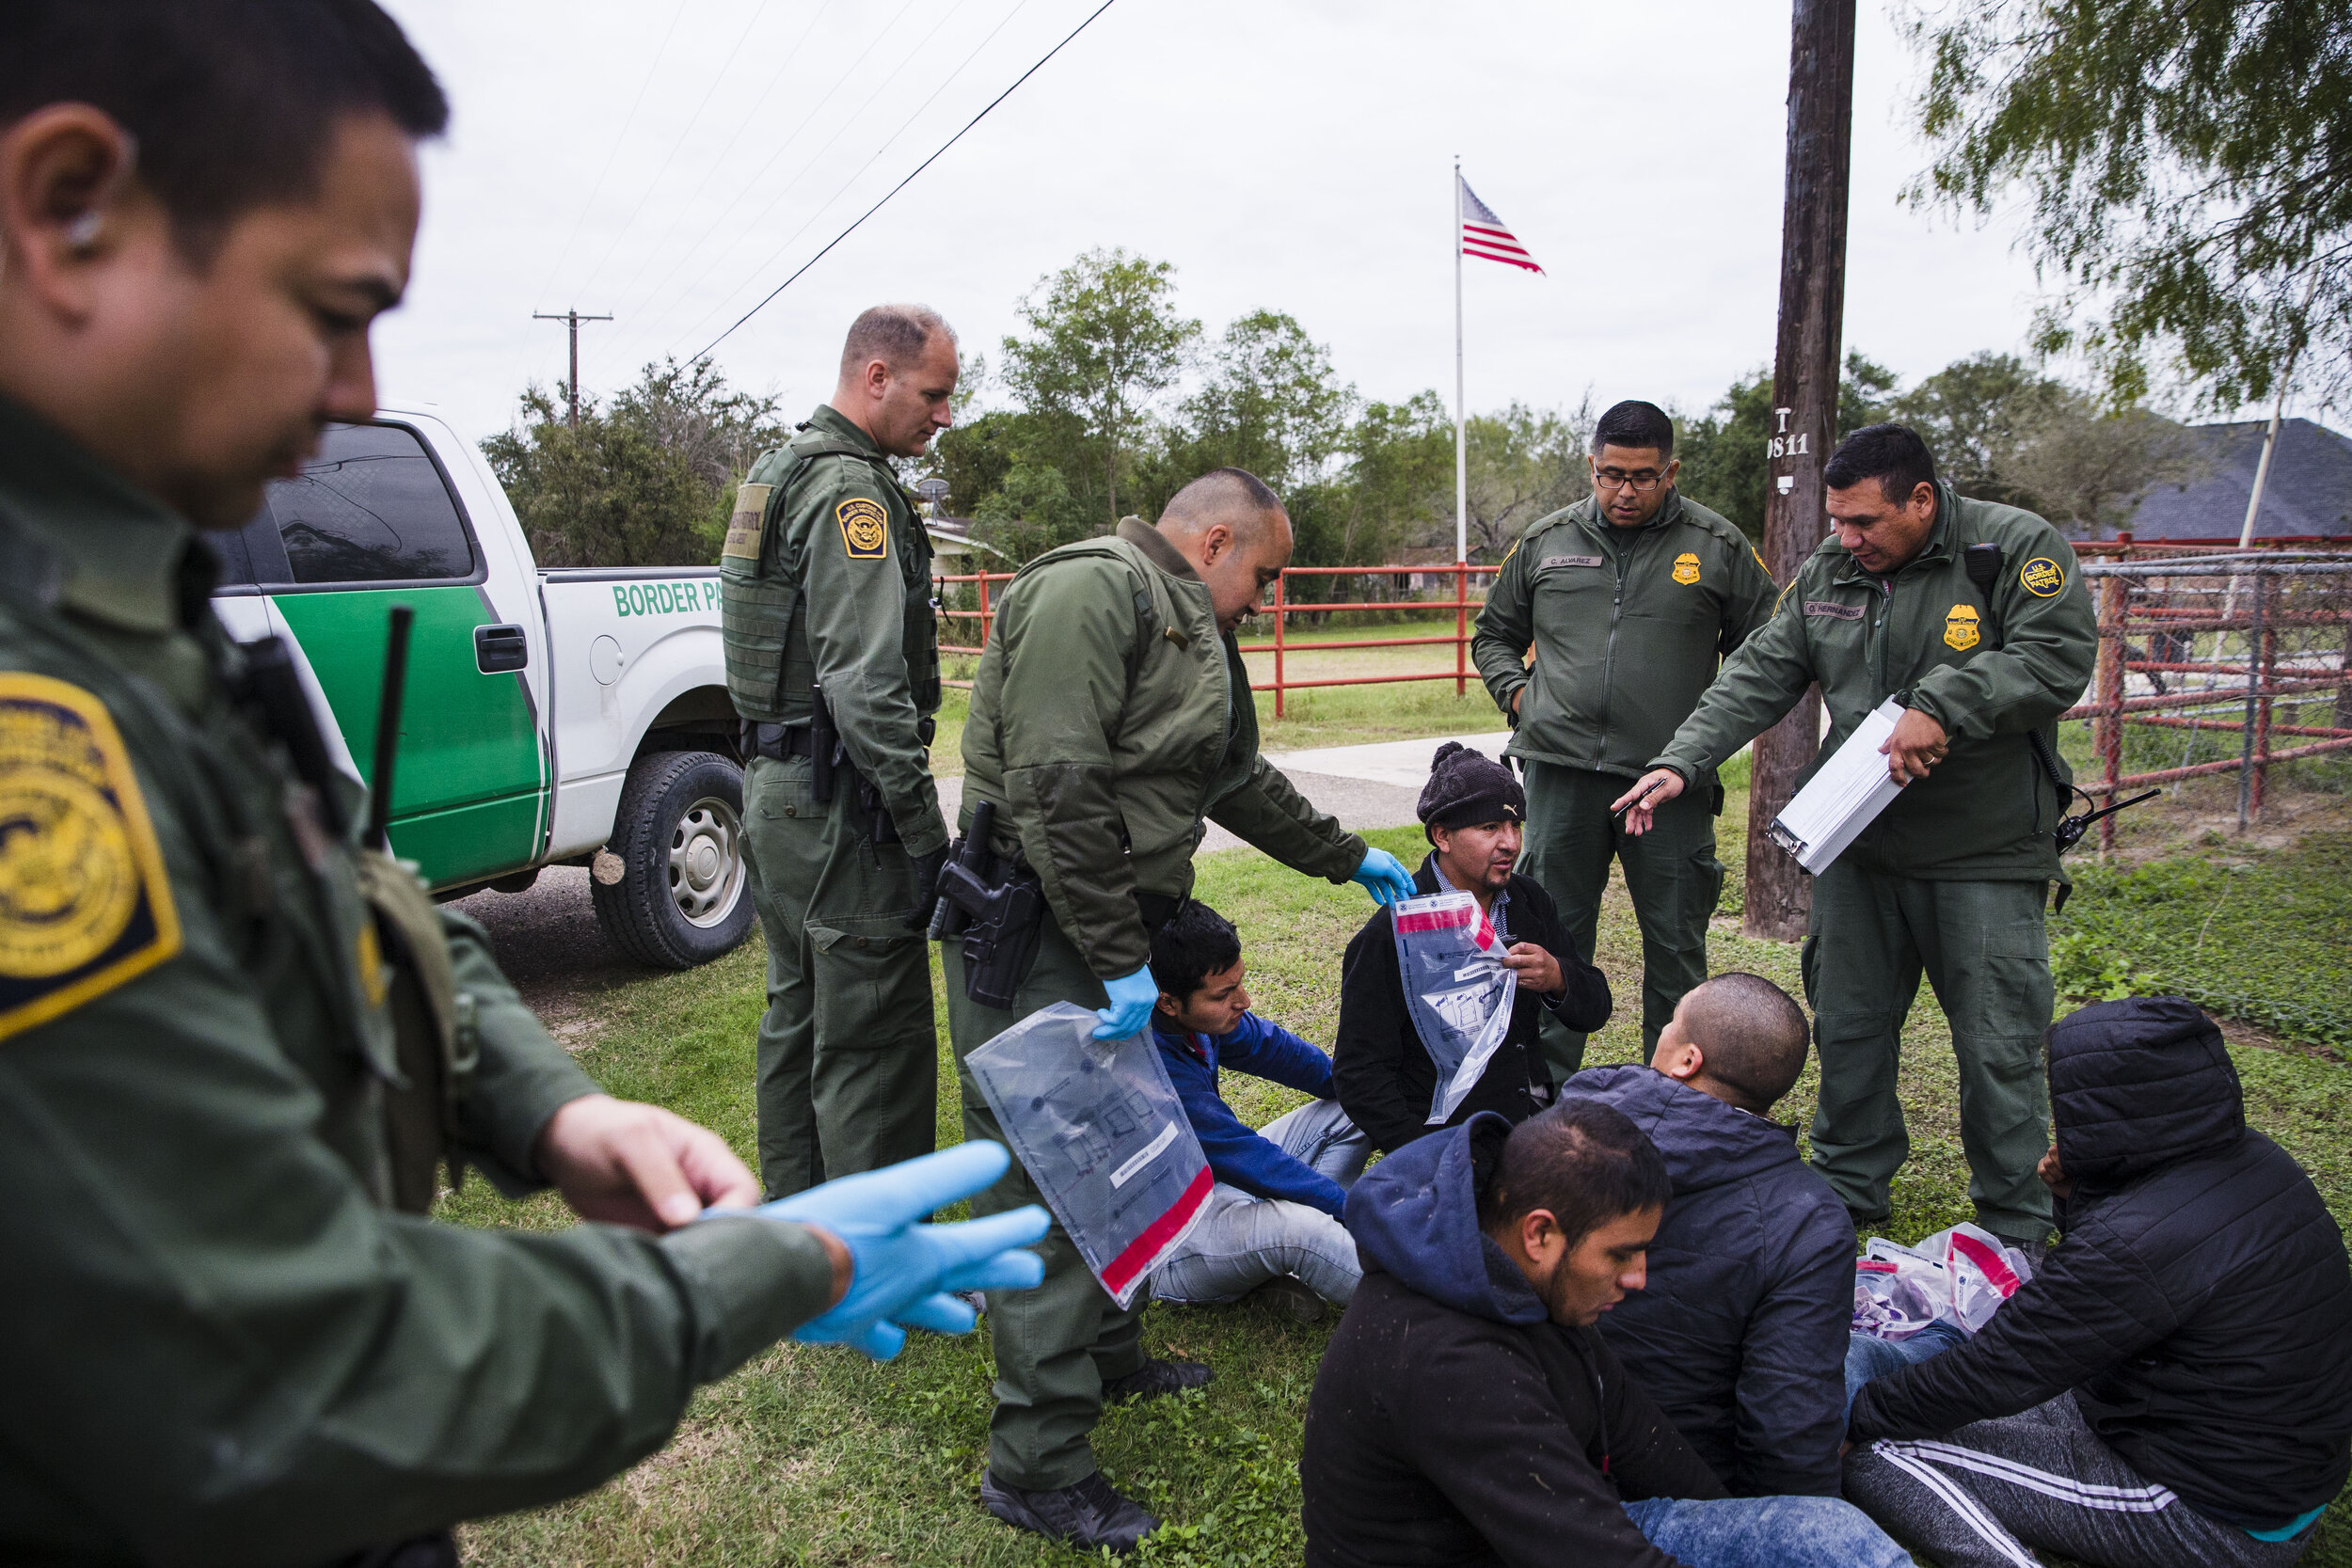  Border Patrol Agents apprehend immigrants who are suspected of illegally crossing the border from Mexico into the United States on Wednesday, Dec. 5, 2018, near McAllen, TX.   [Amanda Voisard/AMERICAN-STATESMAN]  